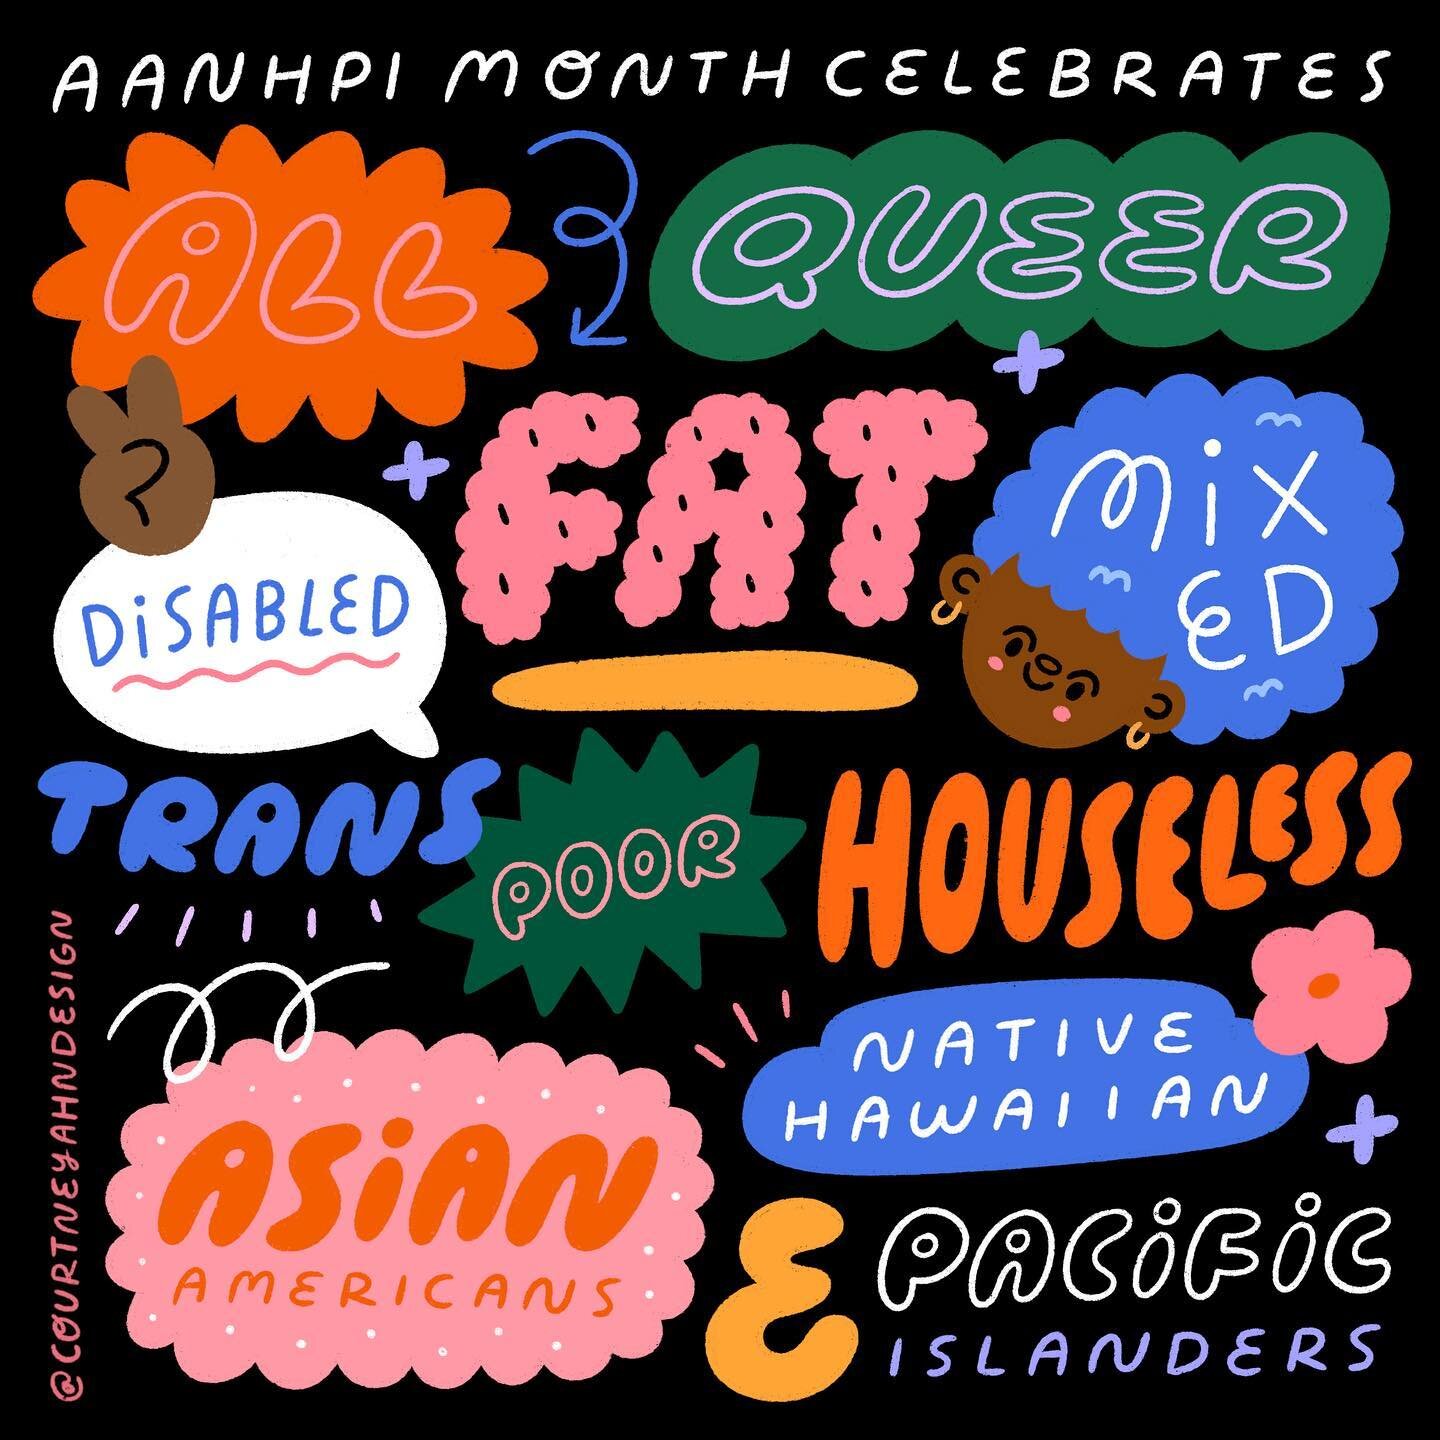 #AANHPI month celebrates us all!!!
⠀⠀⠀⠀⠀⠀⠀⠀
Queer, disabled, fat, mixed, trans, poor, houseless! Asian americans, native hawaiians, Pacific islanders, and the whole lot of us somewhere in between or outside those confines all together! And while I&rs